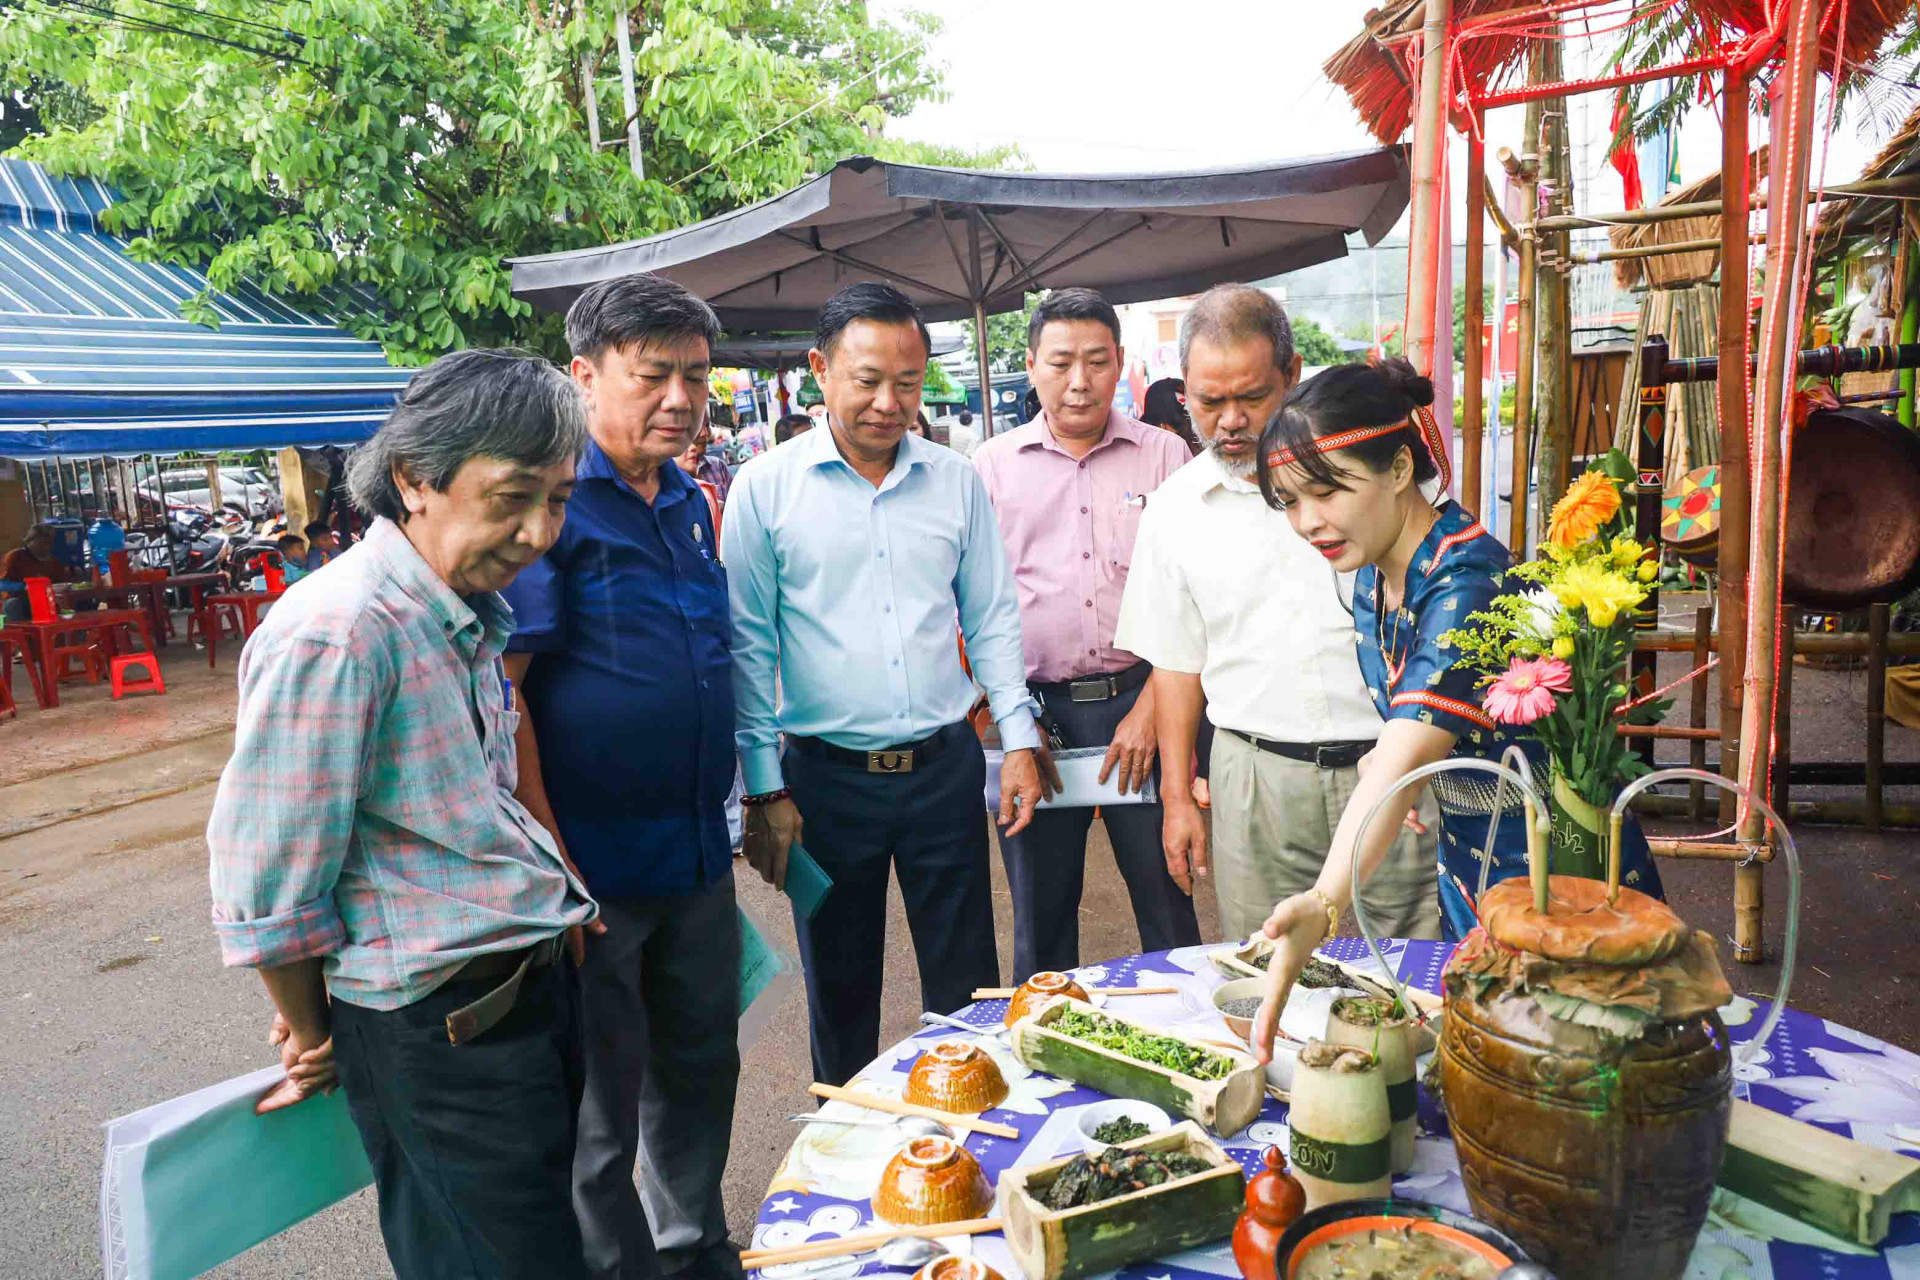 Introducing traditional specialties of Raglai people to the jury